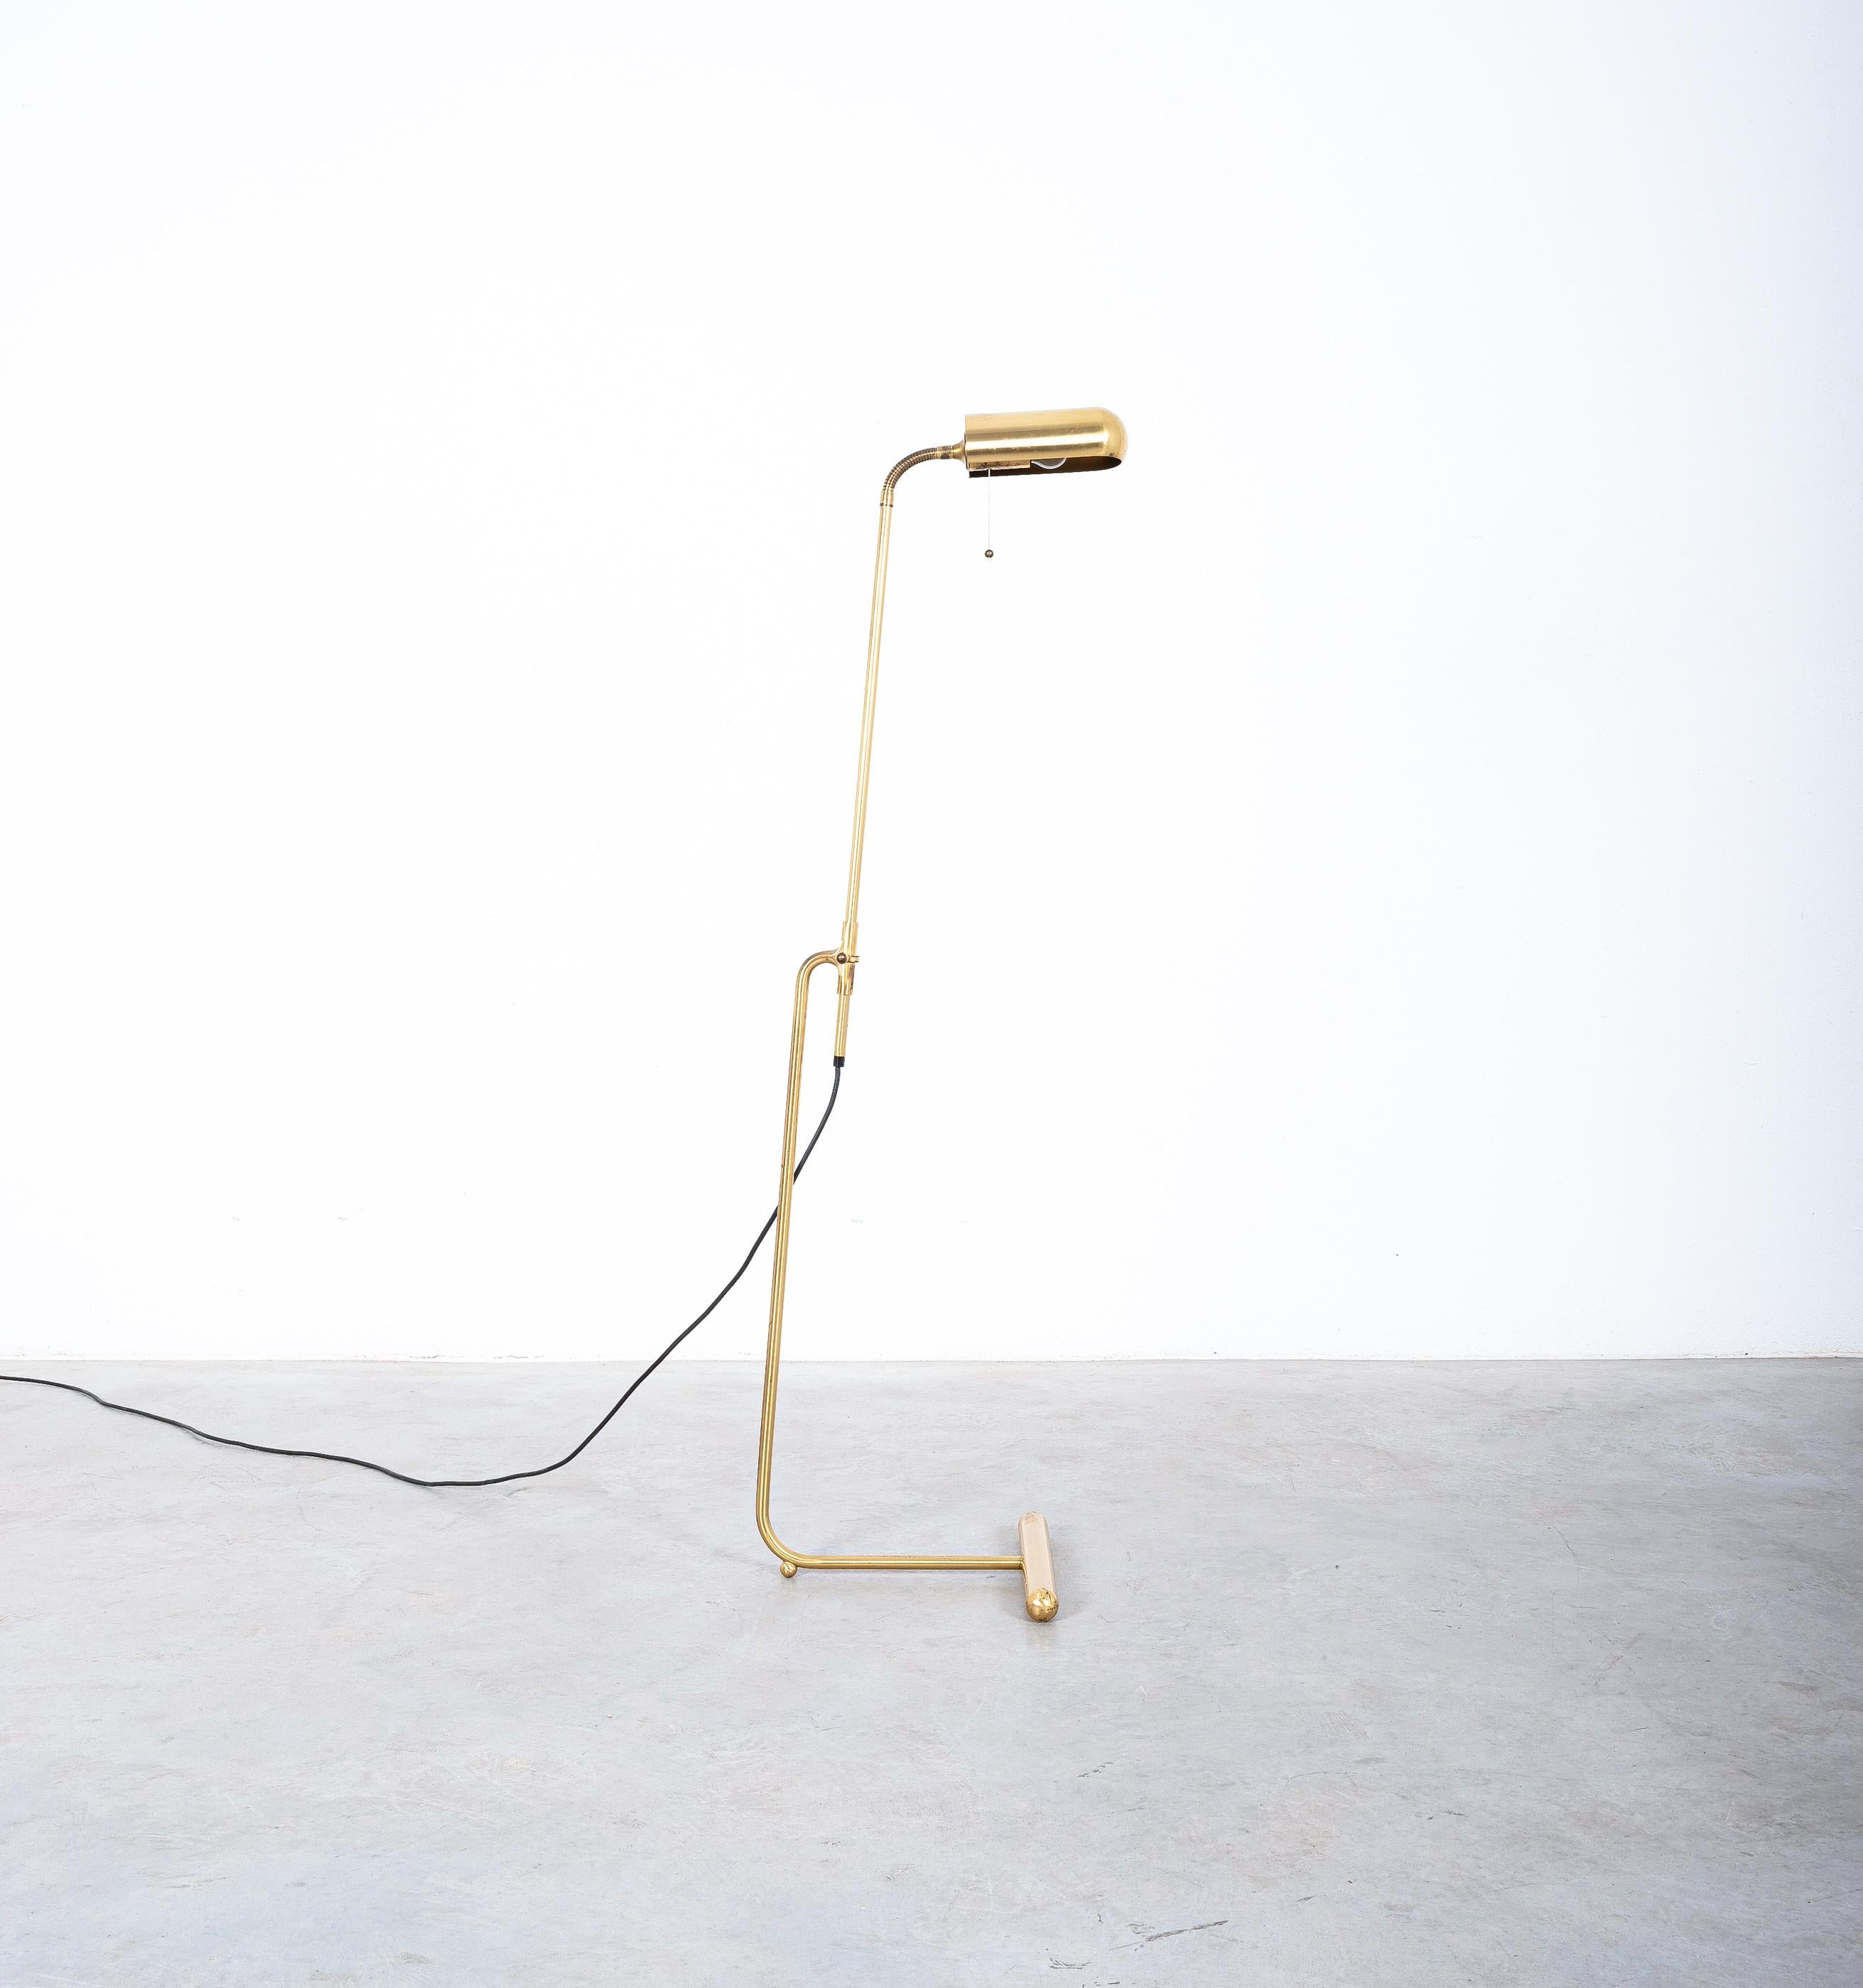 Elegant floor lamp by Florian Schulz, Germany, 1970. 
Dimensions are 12.6